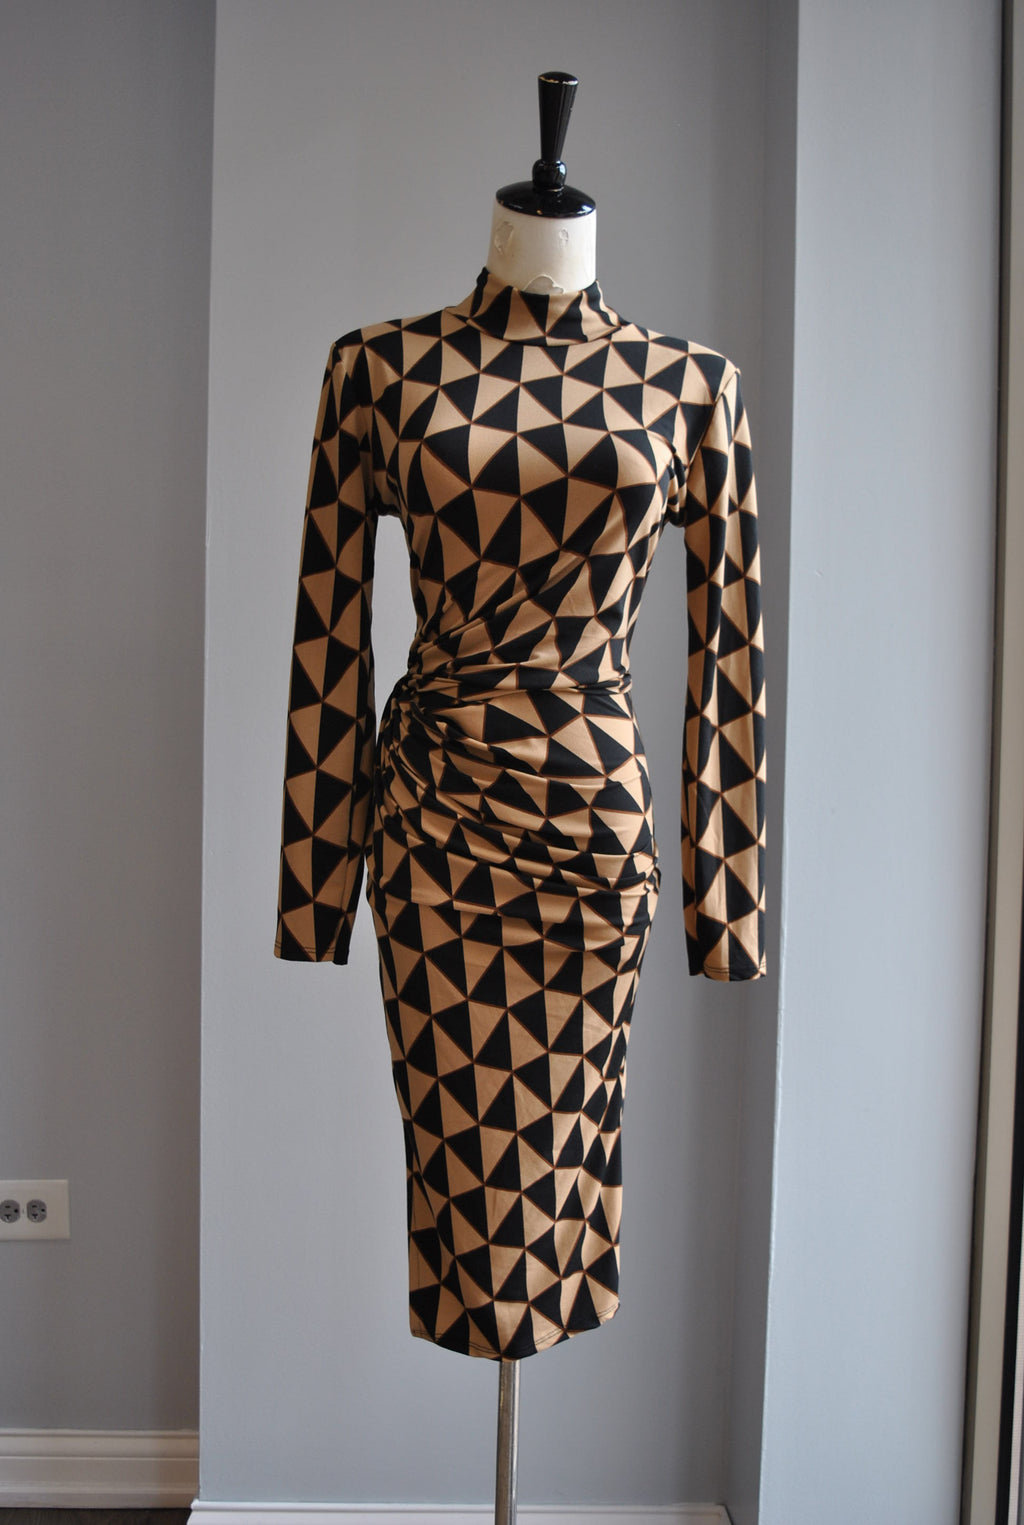 BLACK AND BEIGE PRINT FIT DRESS WITH SIDE RUSHING AND HIGH NECK